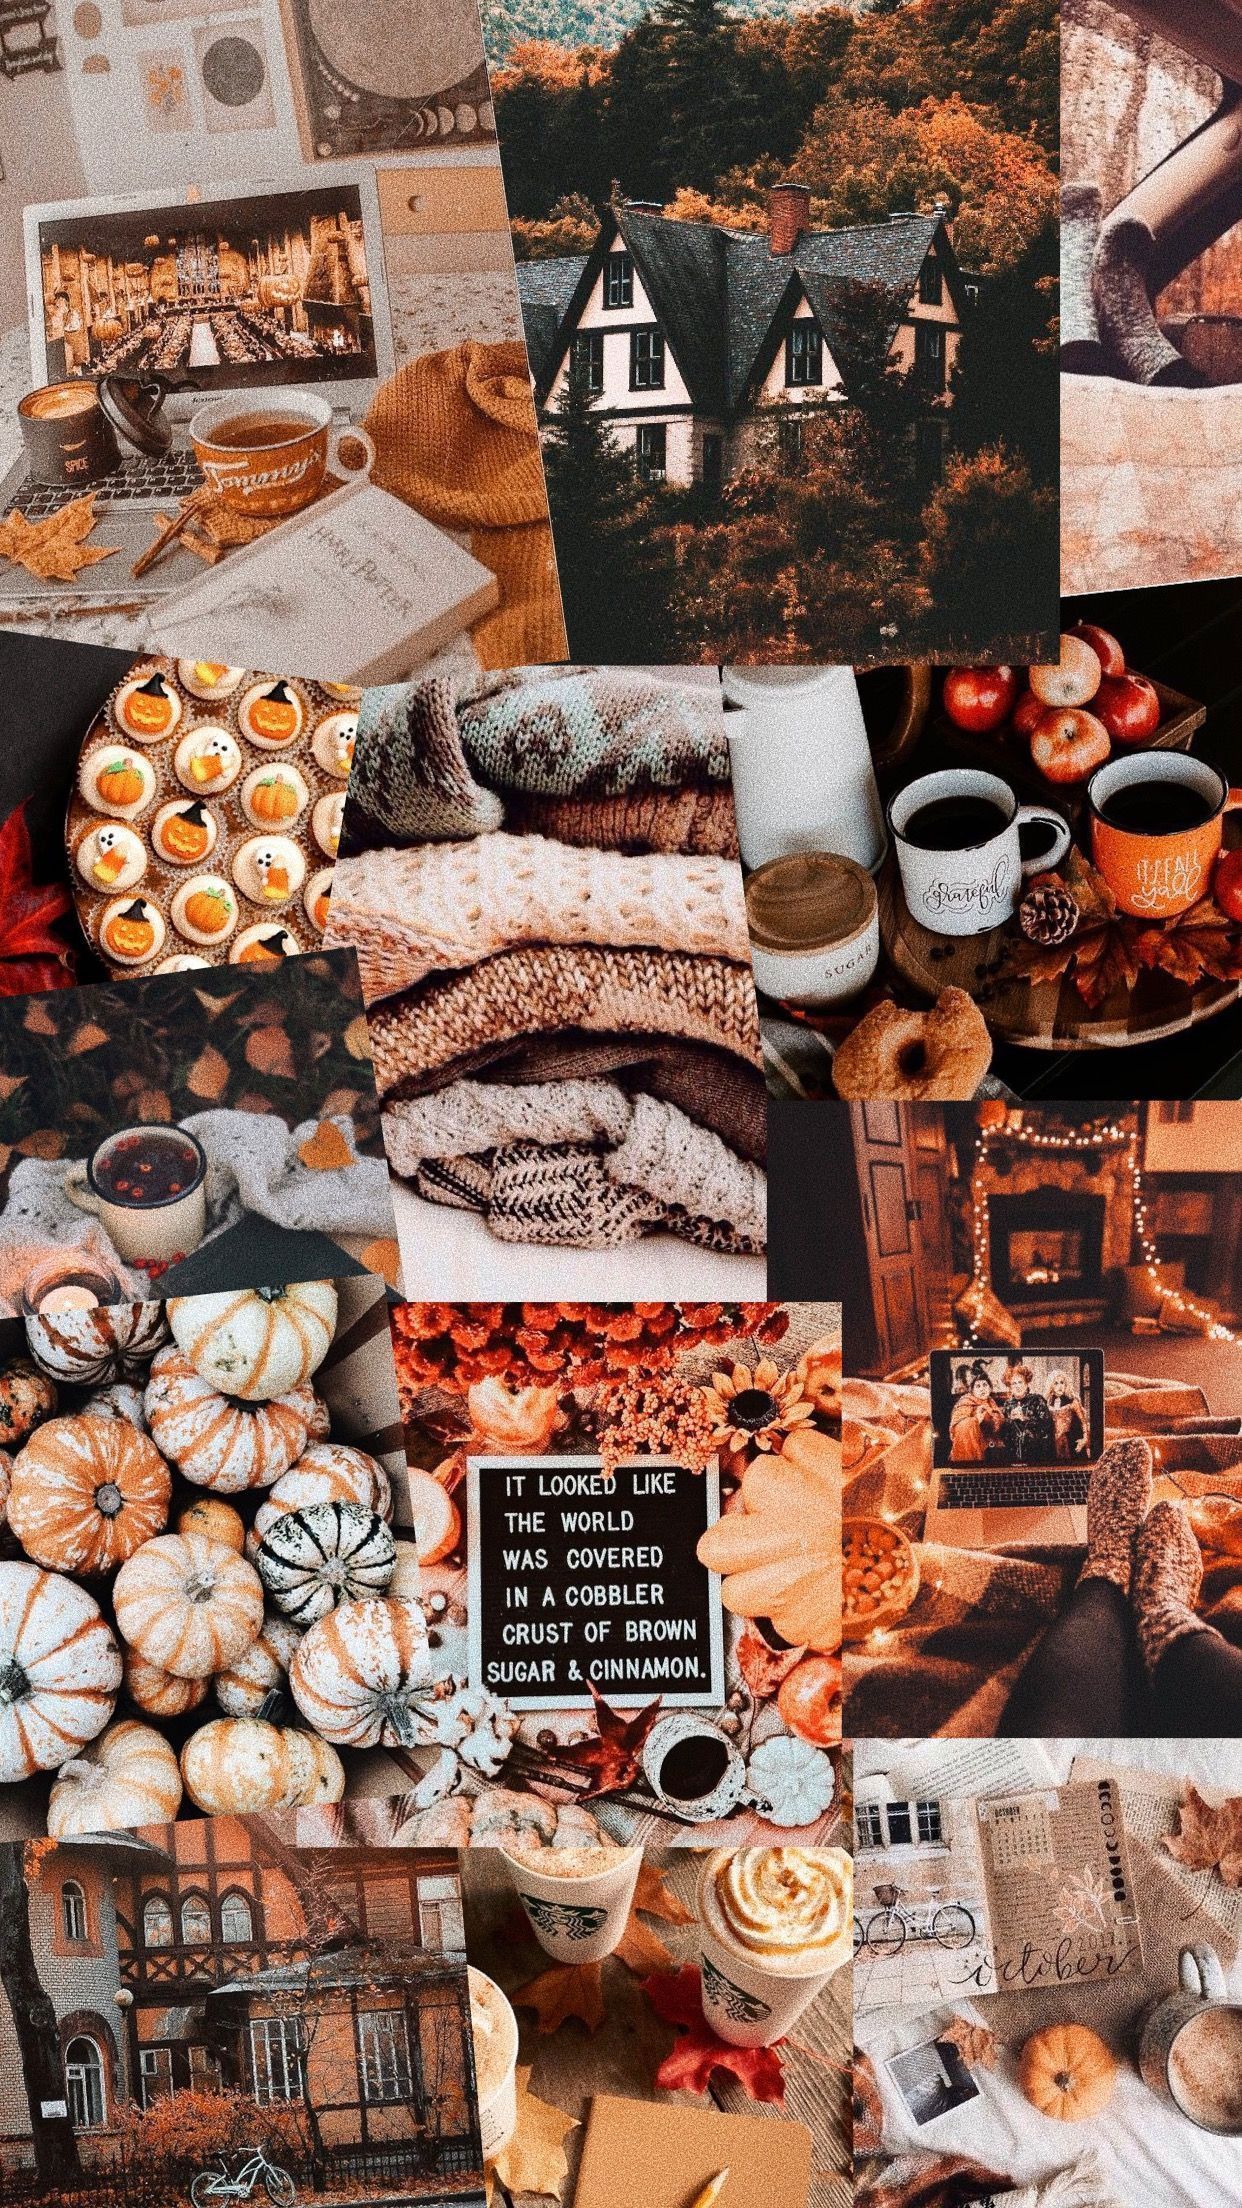 Aesthetic wallpaper collage of fall photos, including a house, pumpkins, and coffee. - Fall, collage, October, cute fall